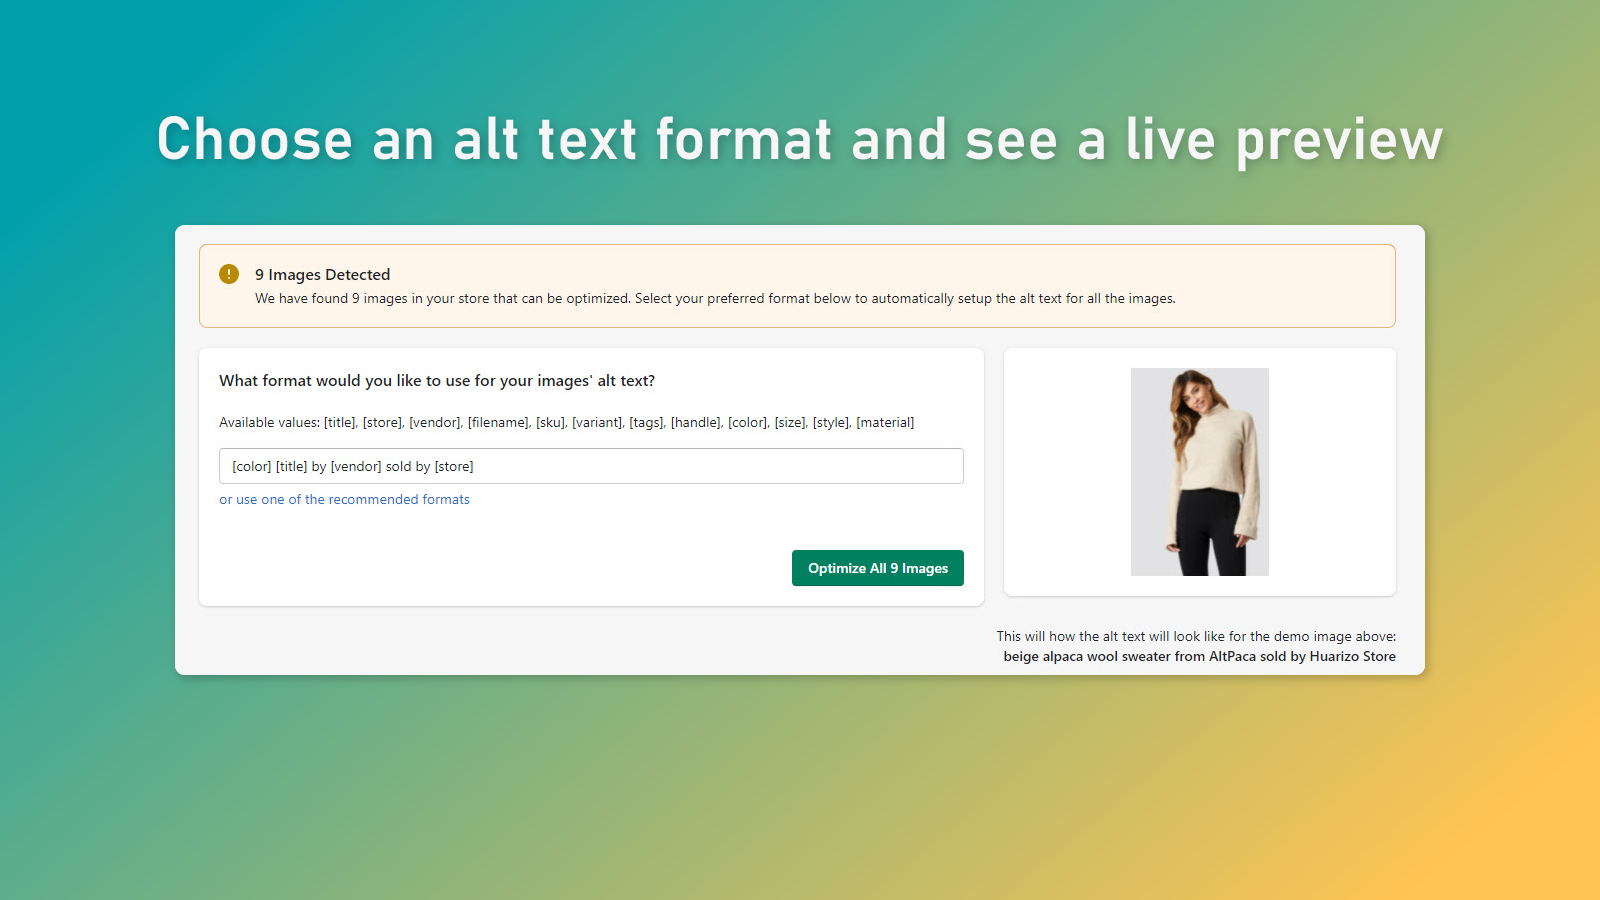 Choose an alt text format and see a live preview